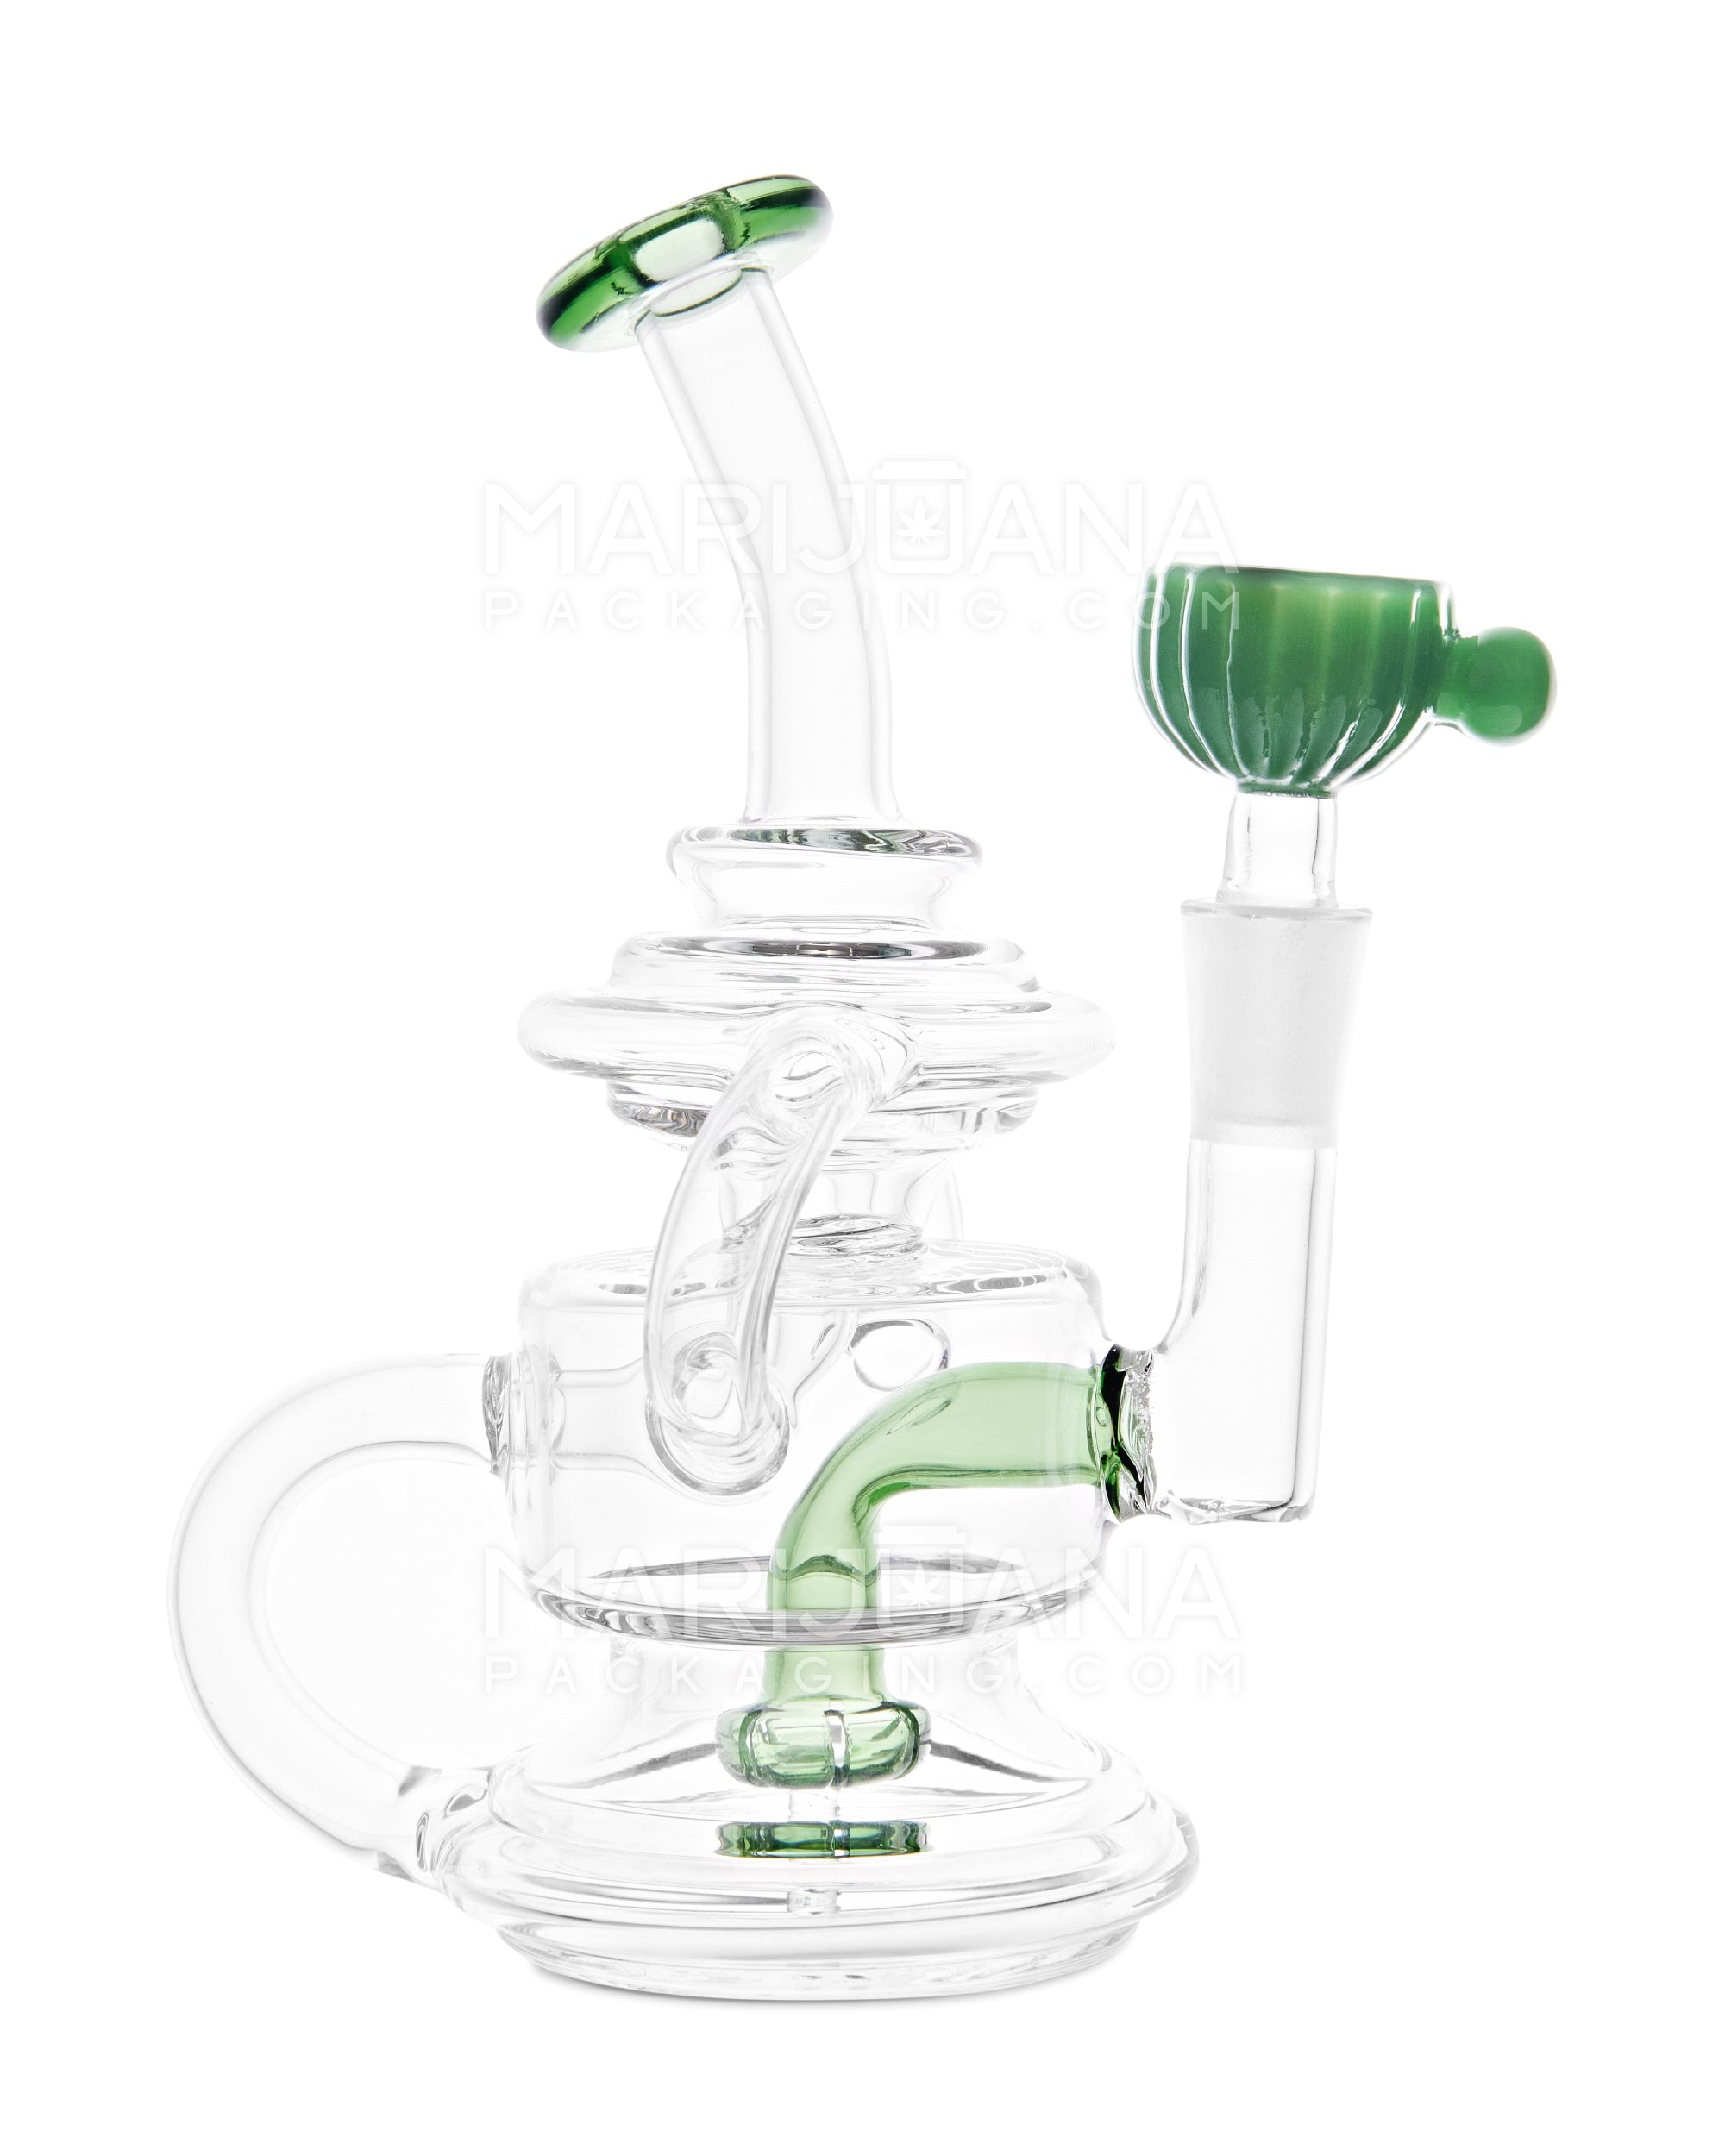 USA Glass | Bent Neck Dual Uptake Recycler Water Pipe w/ Showerhead Perc | 5.5in Tall - 10mm Bowl - Green